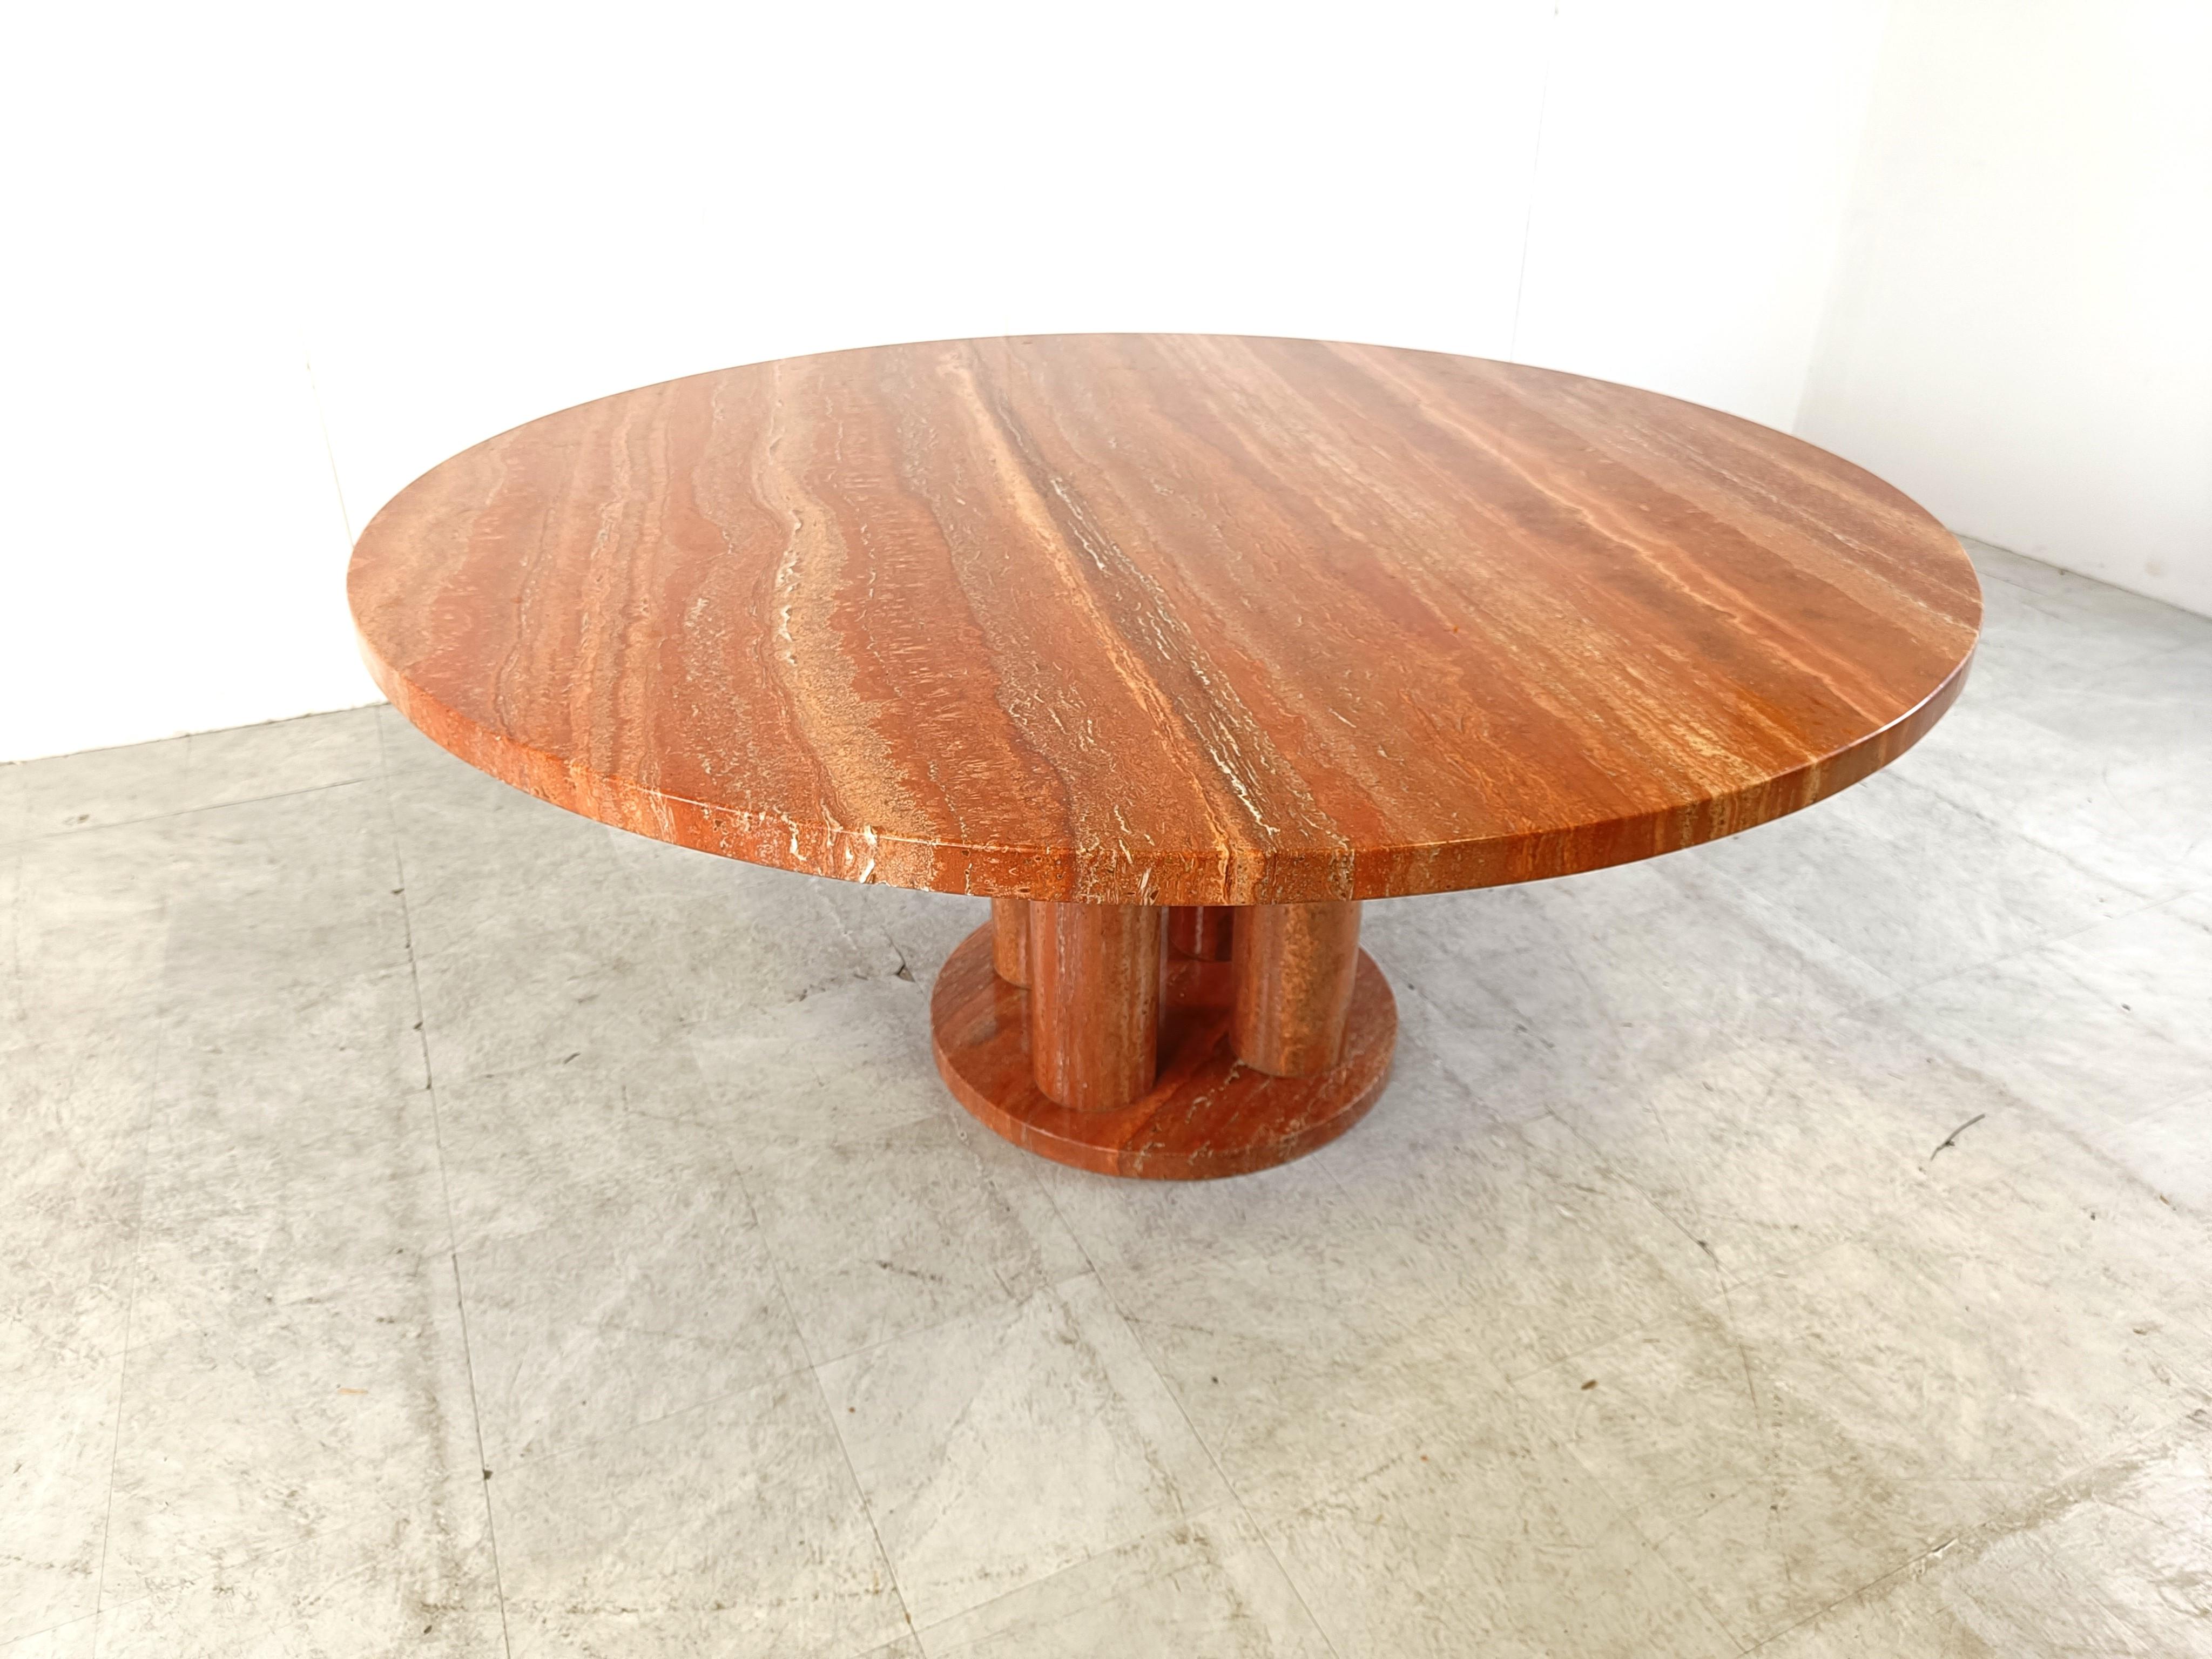 Remarkable red travertine dining table with a four piece column base and a large round table top.

The table was custom made in the 1970s, it's very much in the style of Mario Bellini.

Beautiful natural red granite stone with a gorgeous natural